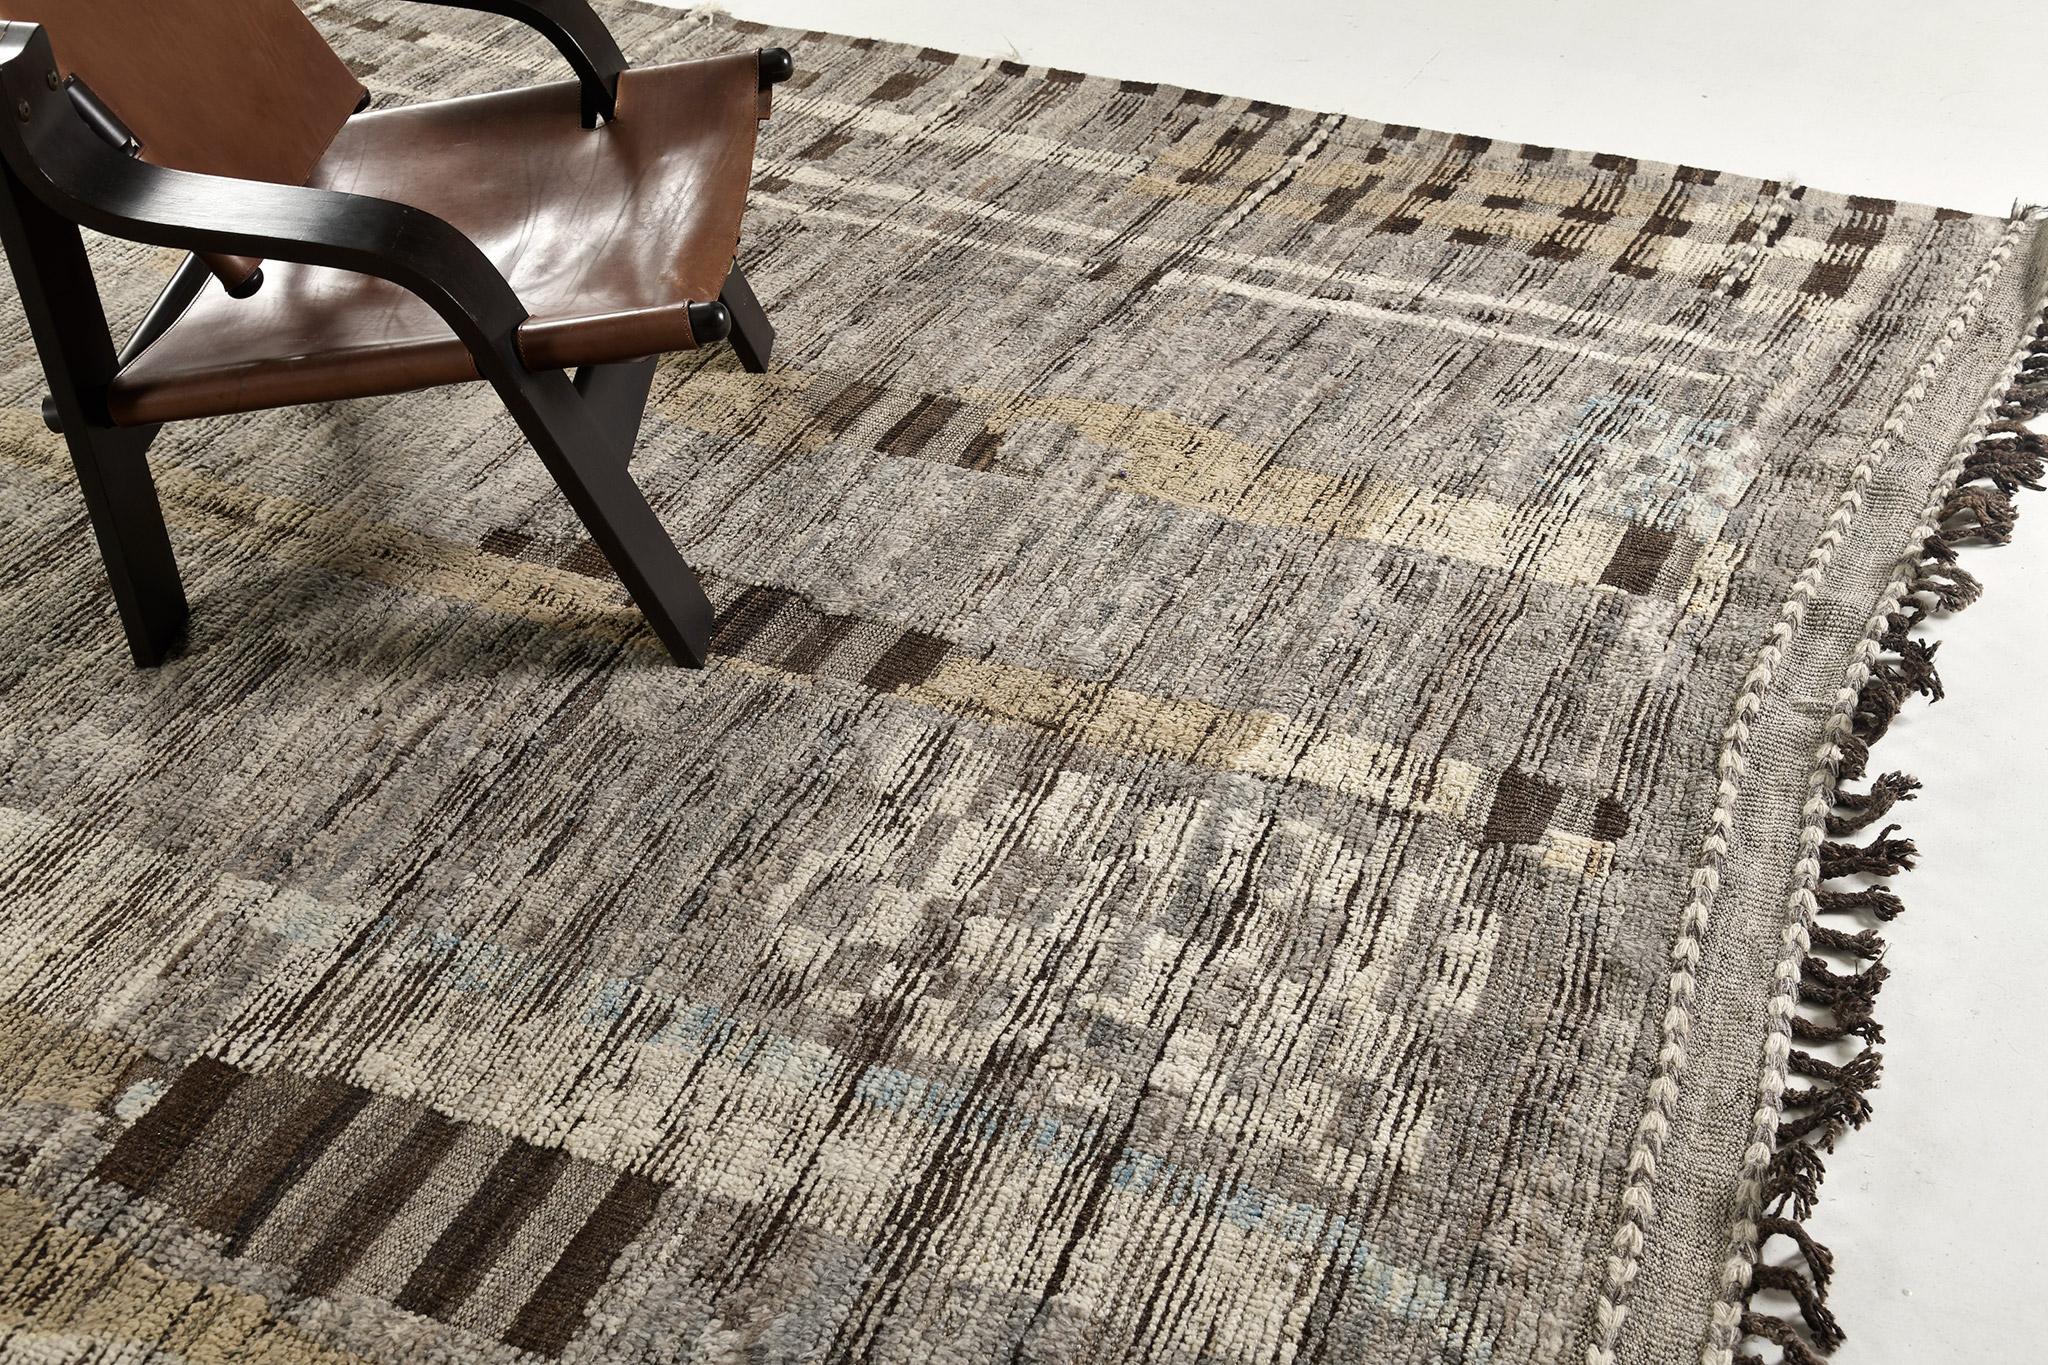 Nakhla is a natural earth-toned rug and a modern interpretation of the Moroccan world. These rugs' irregular patches of cream, gold, and gray resemble the fibers of nature and their ability to be used for crafts such as cords and basketry. Designed